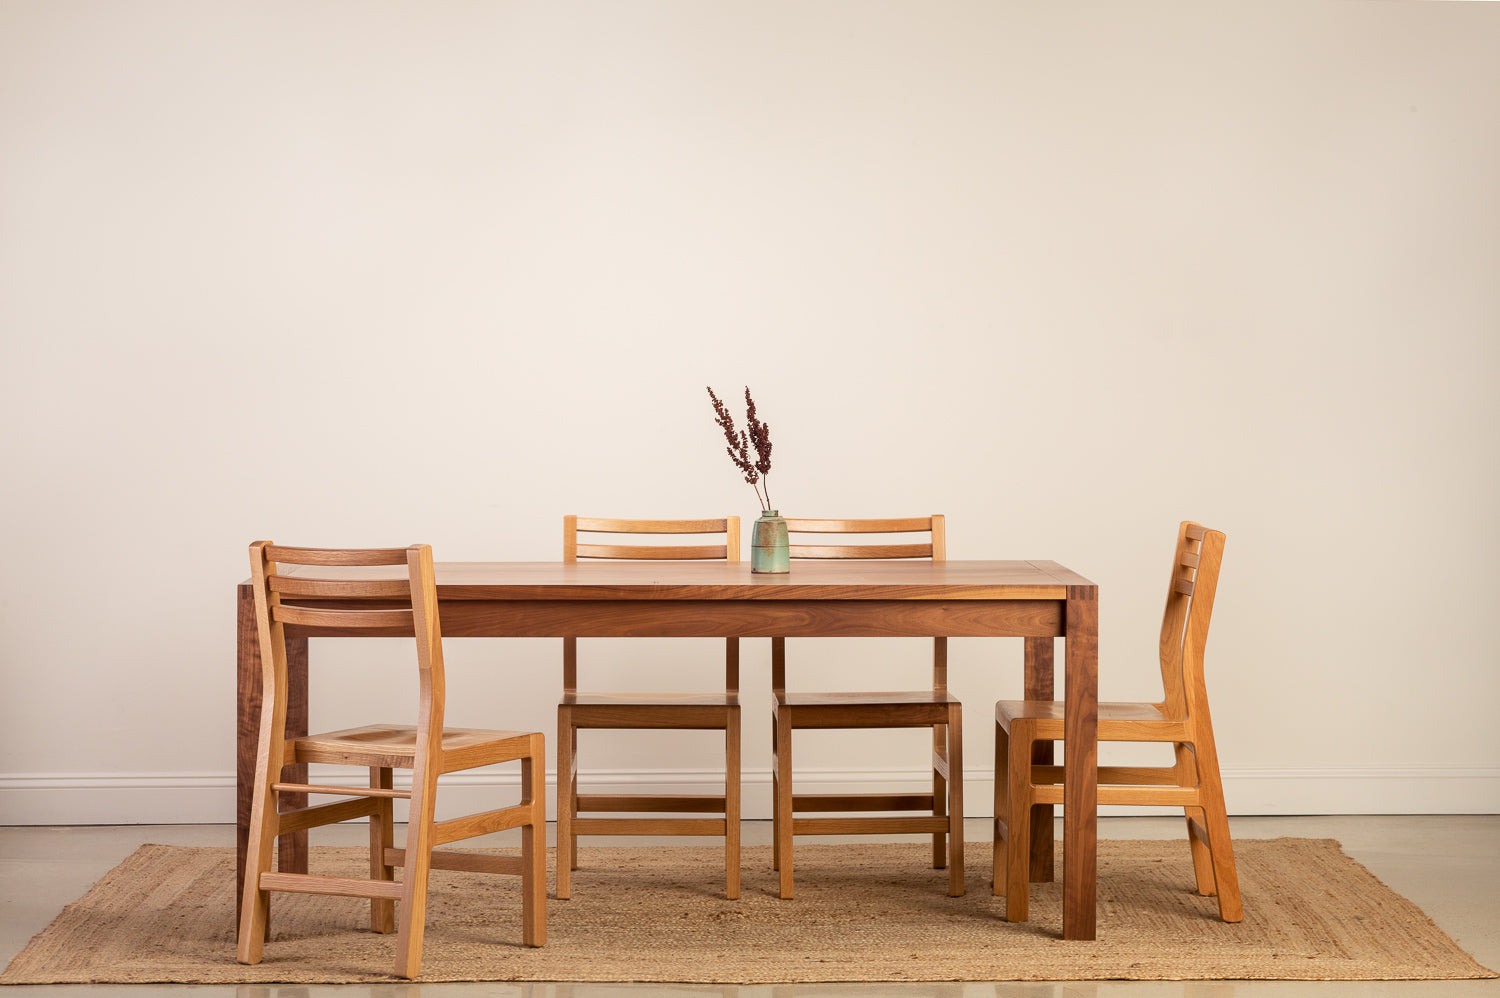 Chilton Furniture's solid walnut wood Harbor Dining Table with Dockside chairs